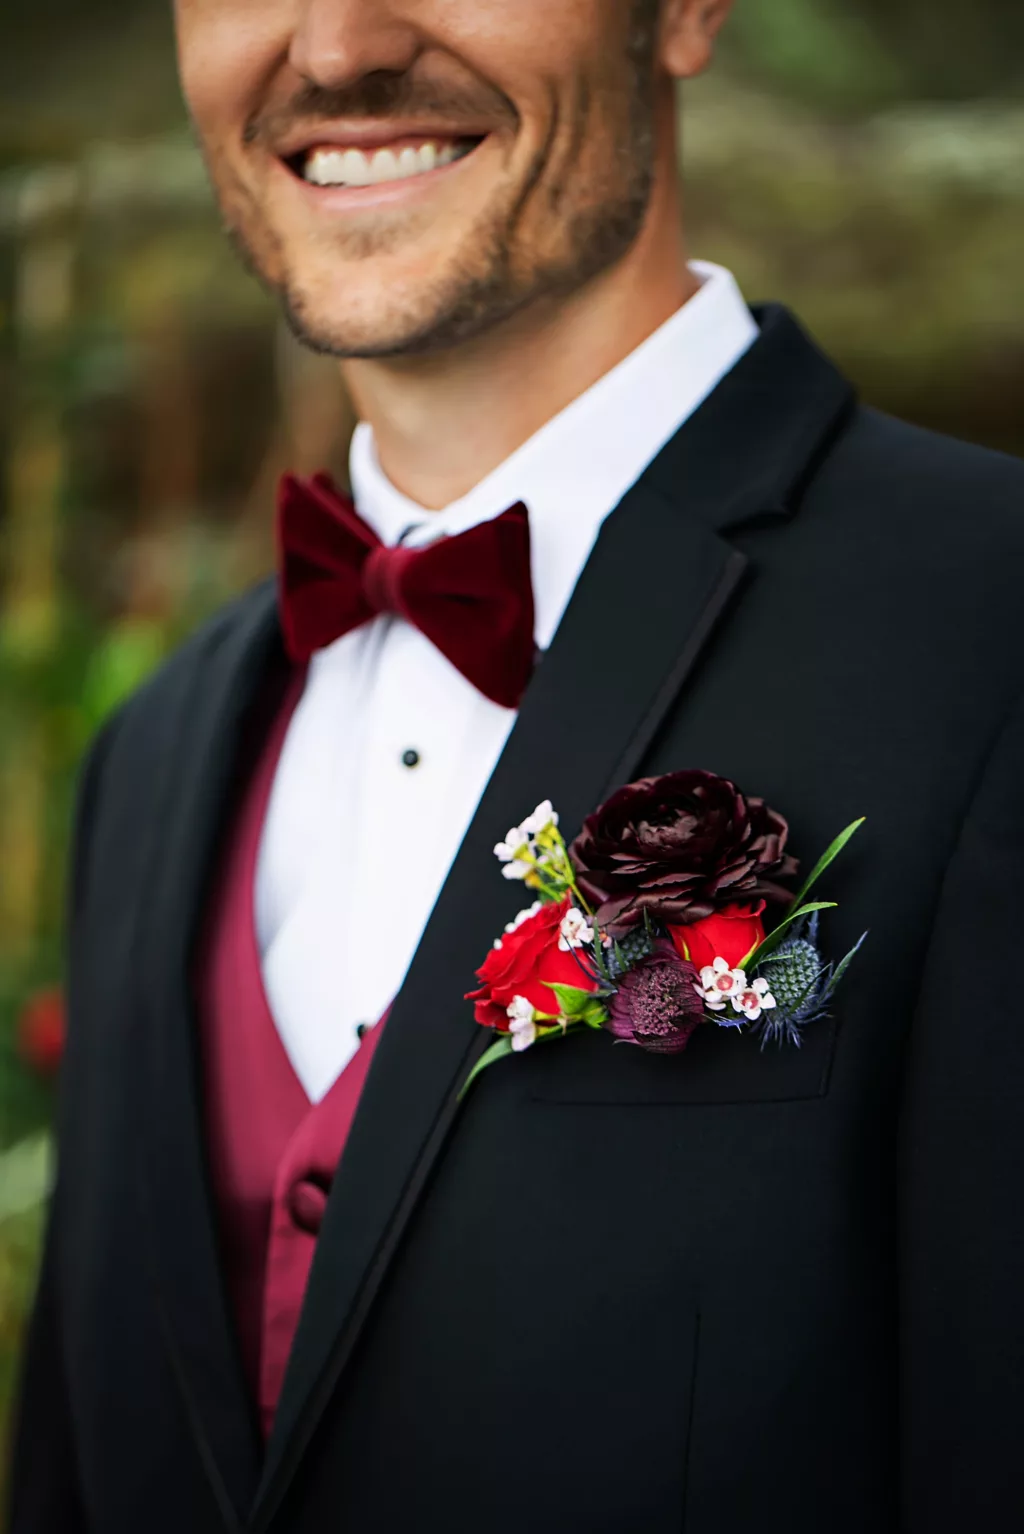 Burgundy and Red Roses, Blue Thistle, White Bacopa, and Greenery Pocket Boutonniere Inspiration | Burgundy Velvet Bowtie with Vest and Black Tuxedo Groom Attire Ideas | Tampa Bay Florist Save The Date Florida